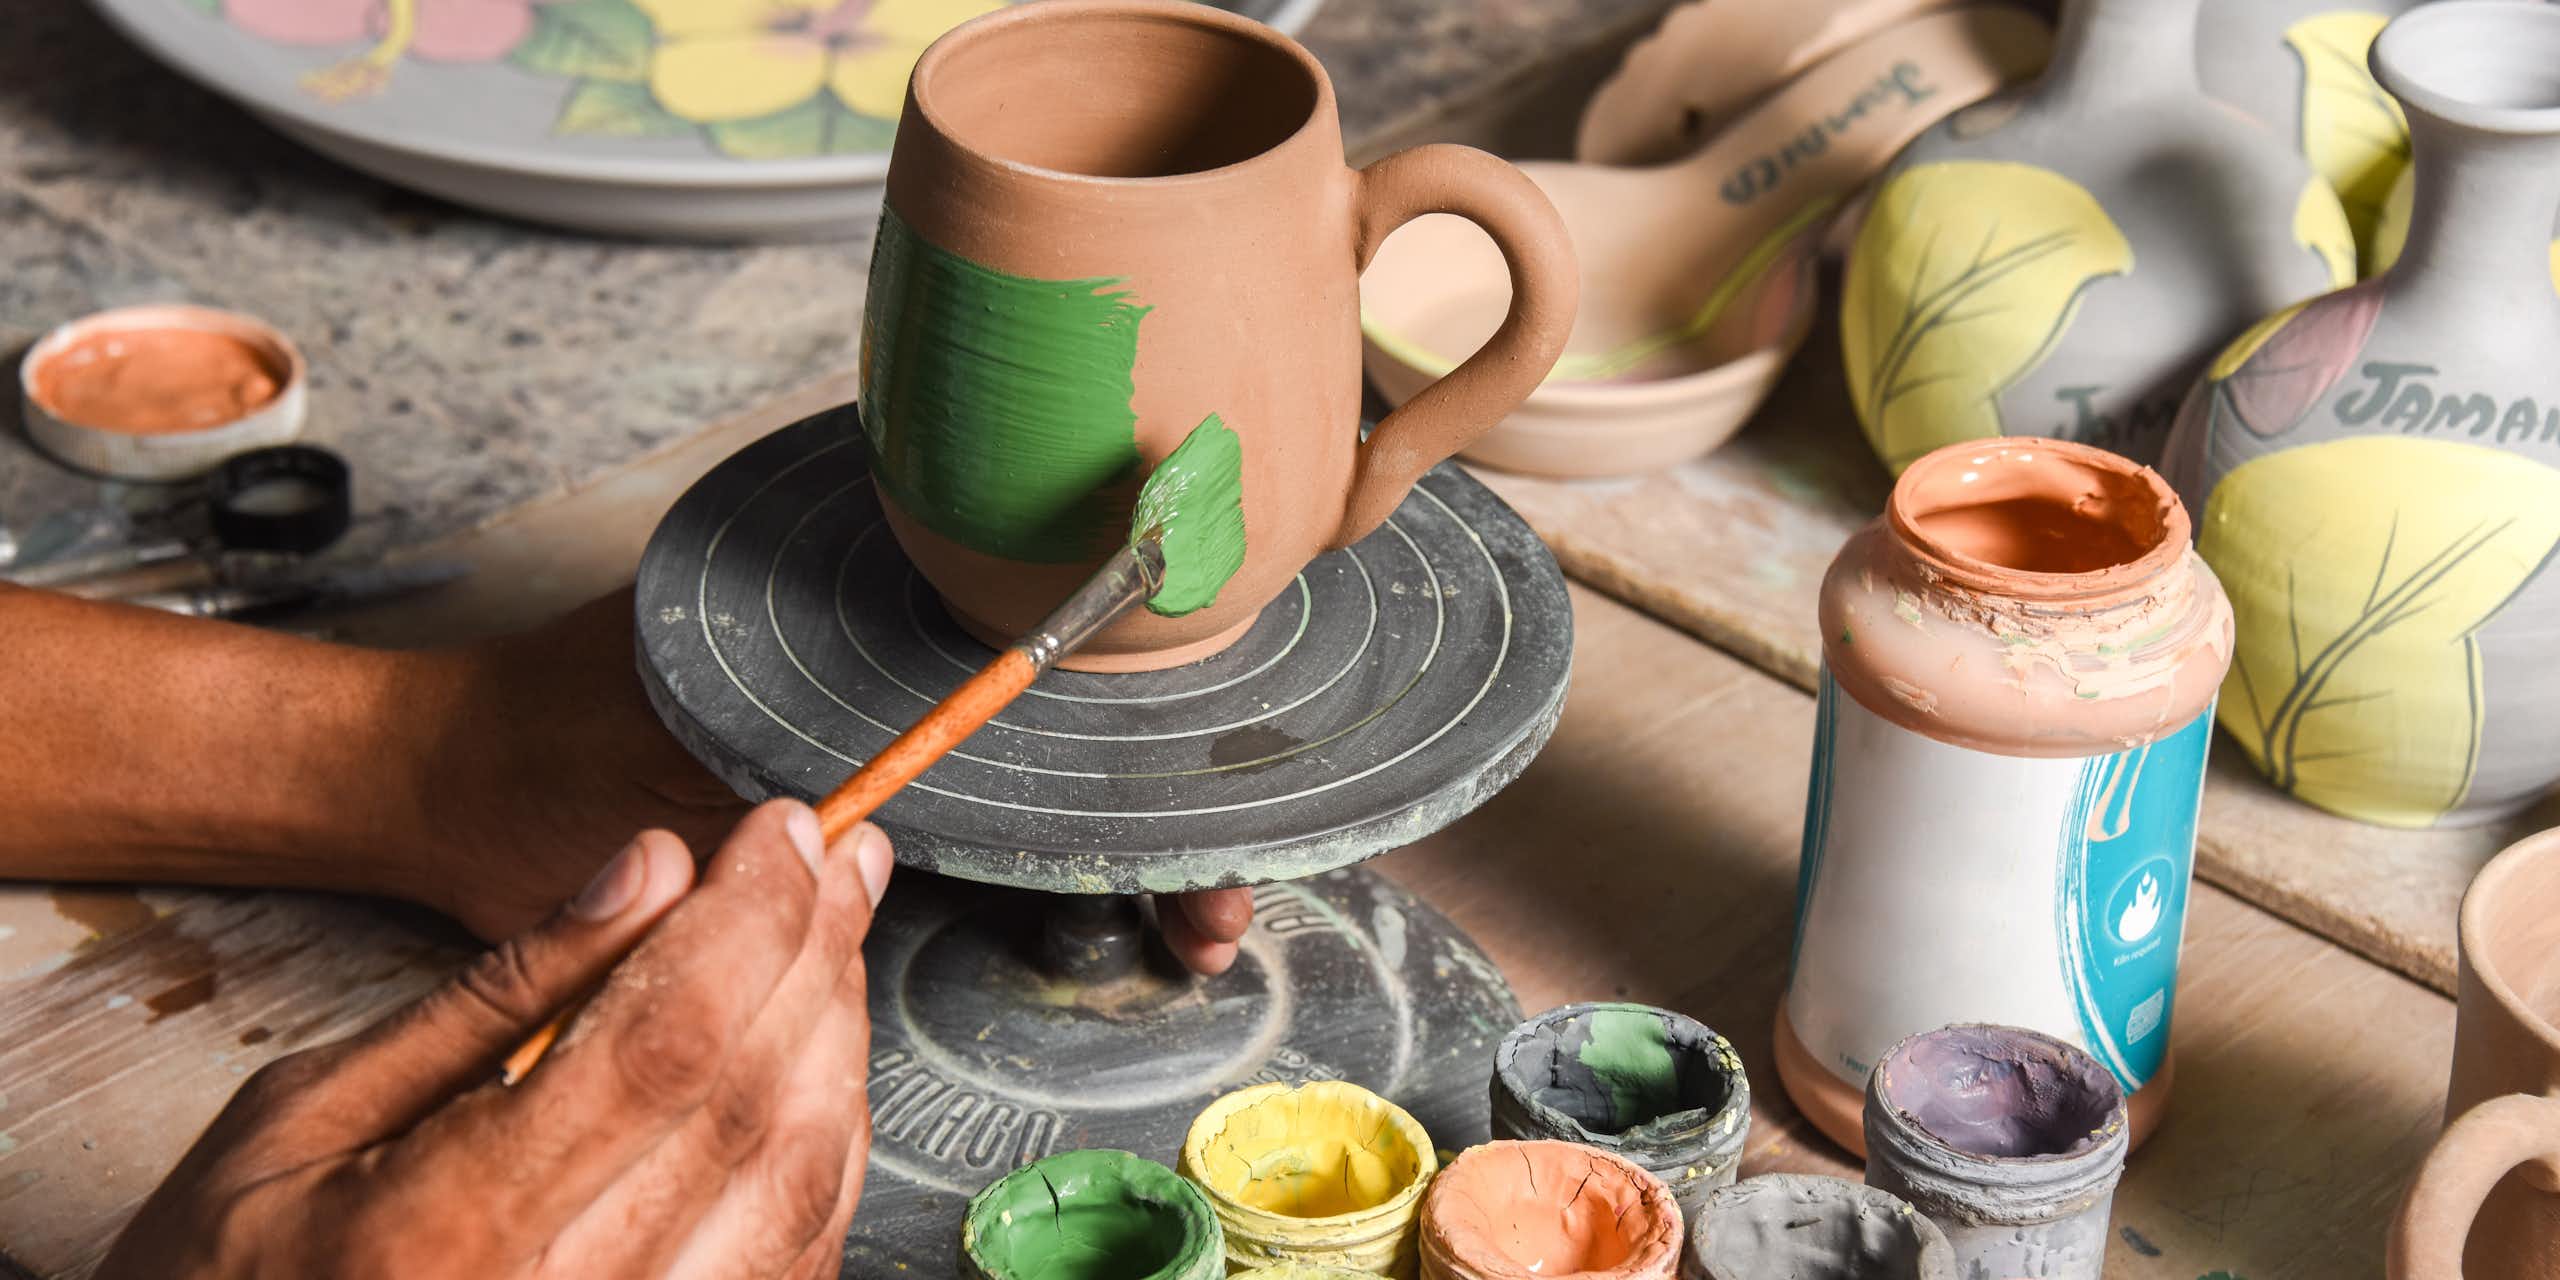 Potter's hands shown painting a clay mug, with other pots and painting accessories around it.